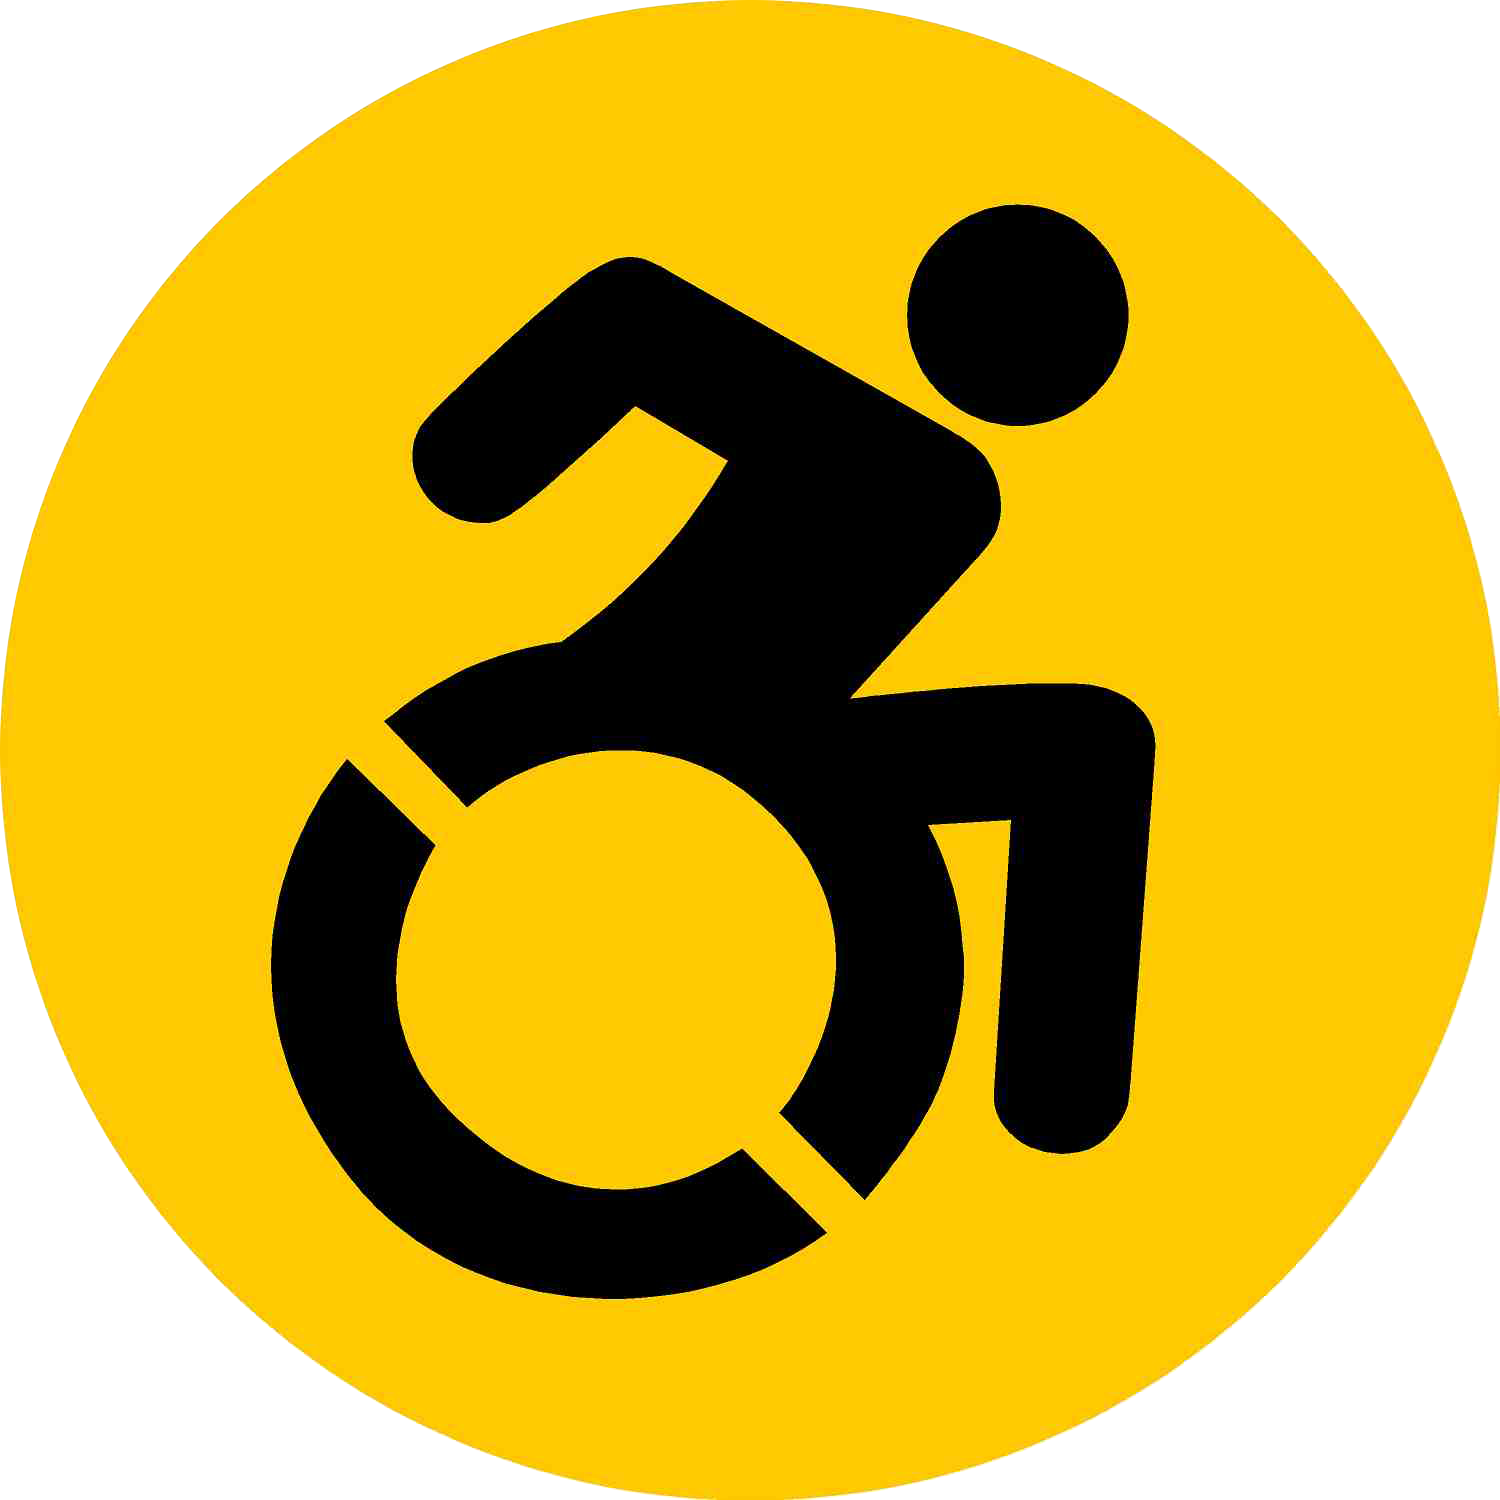 Accessibility pictogram